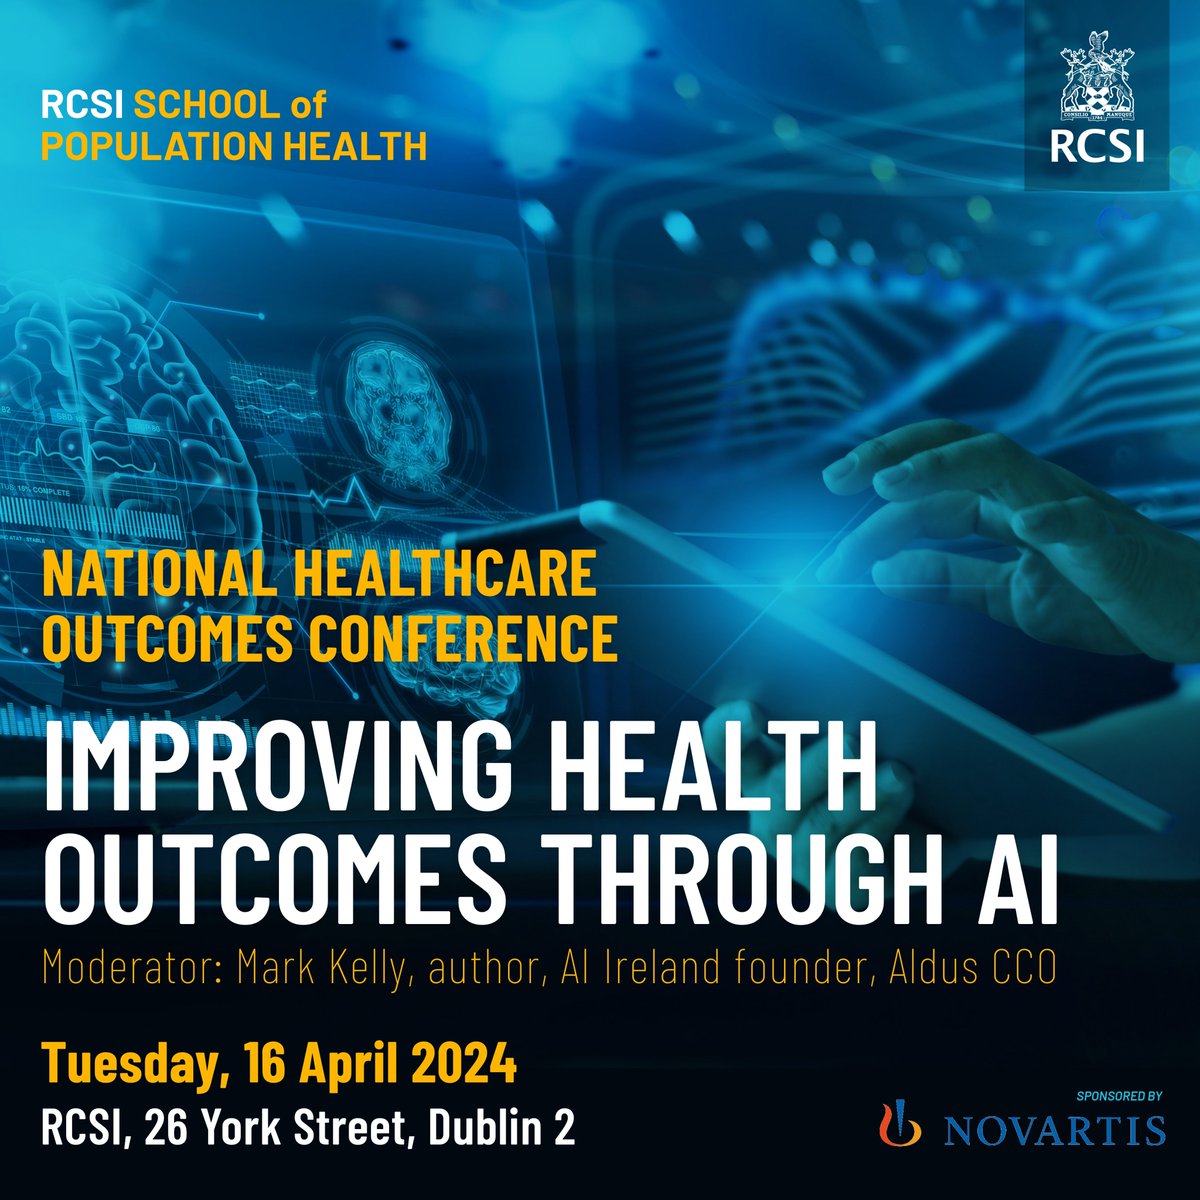 The National Healthcare Outcomes Conference takes place on 16 April in RCSI. This year’s theme is ‘Improving health outcomes through AI’. Topics include AI potentials and pitfalls, AI and patient care and more! Register at rcsi.com/nhoc Supported by @NovartisIreland